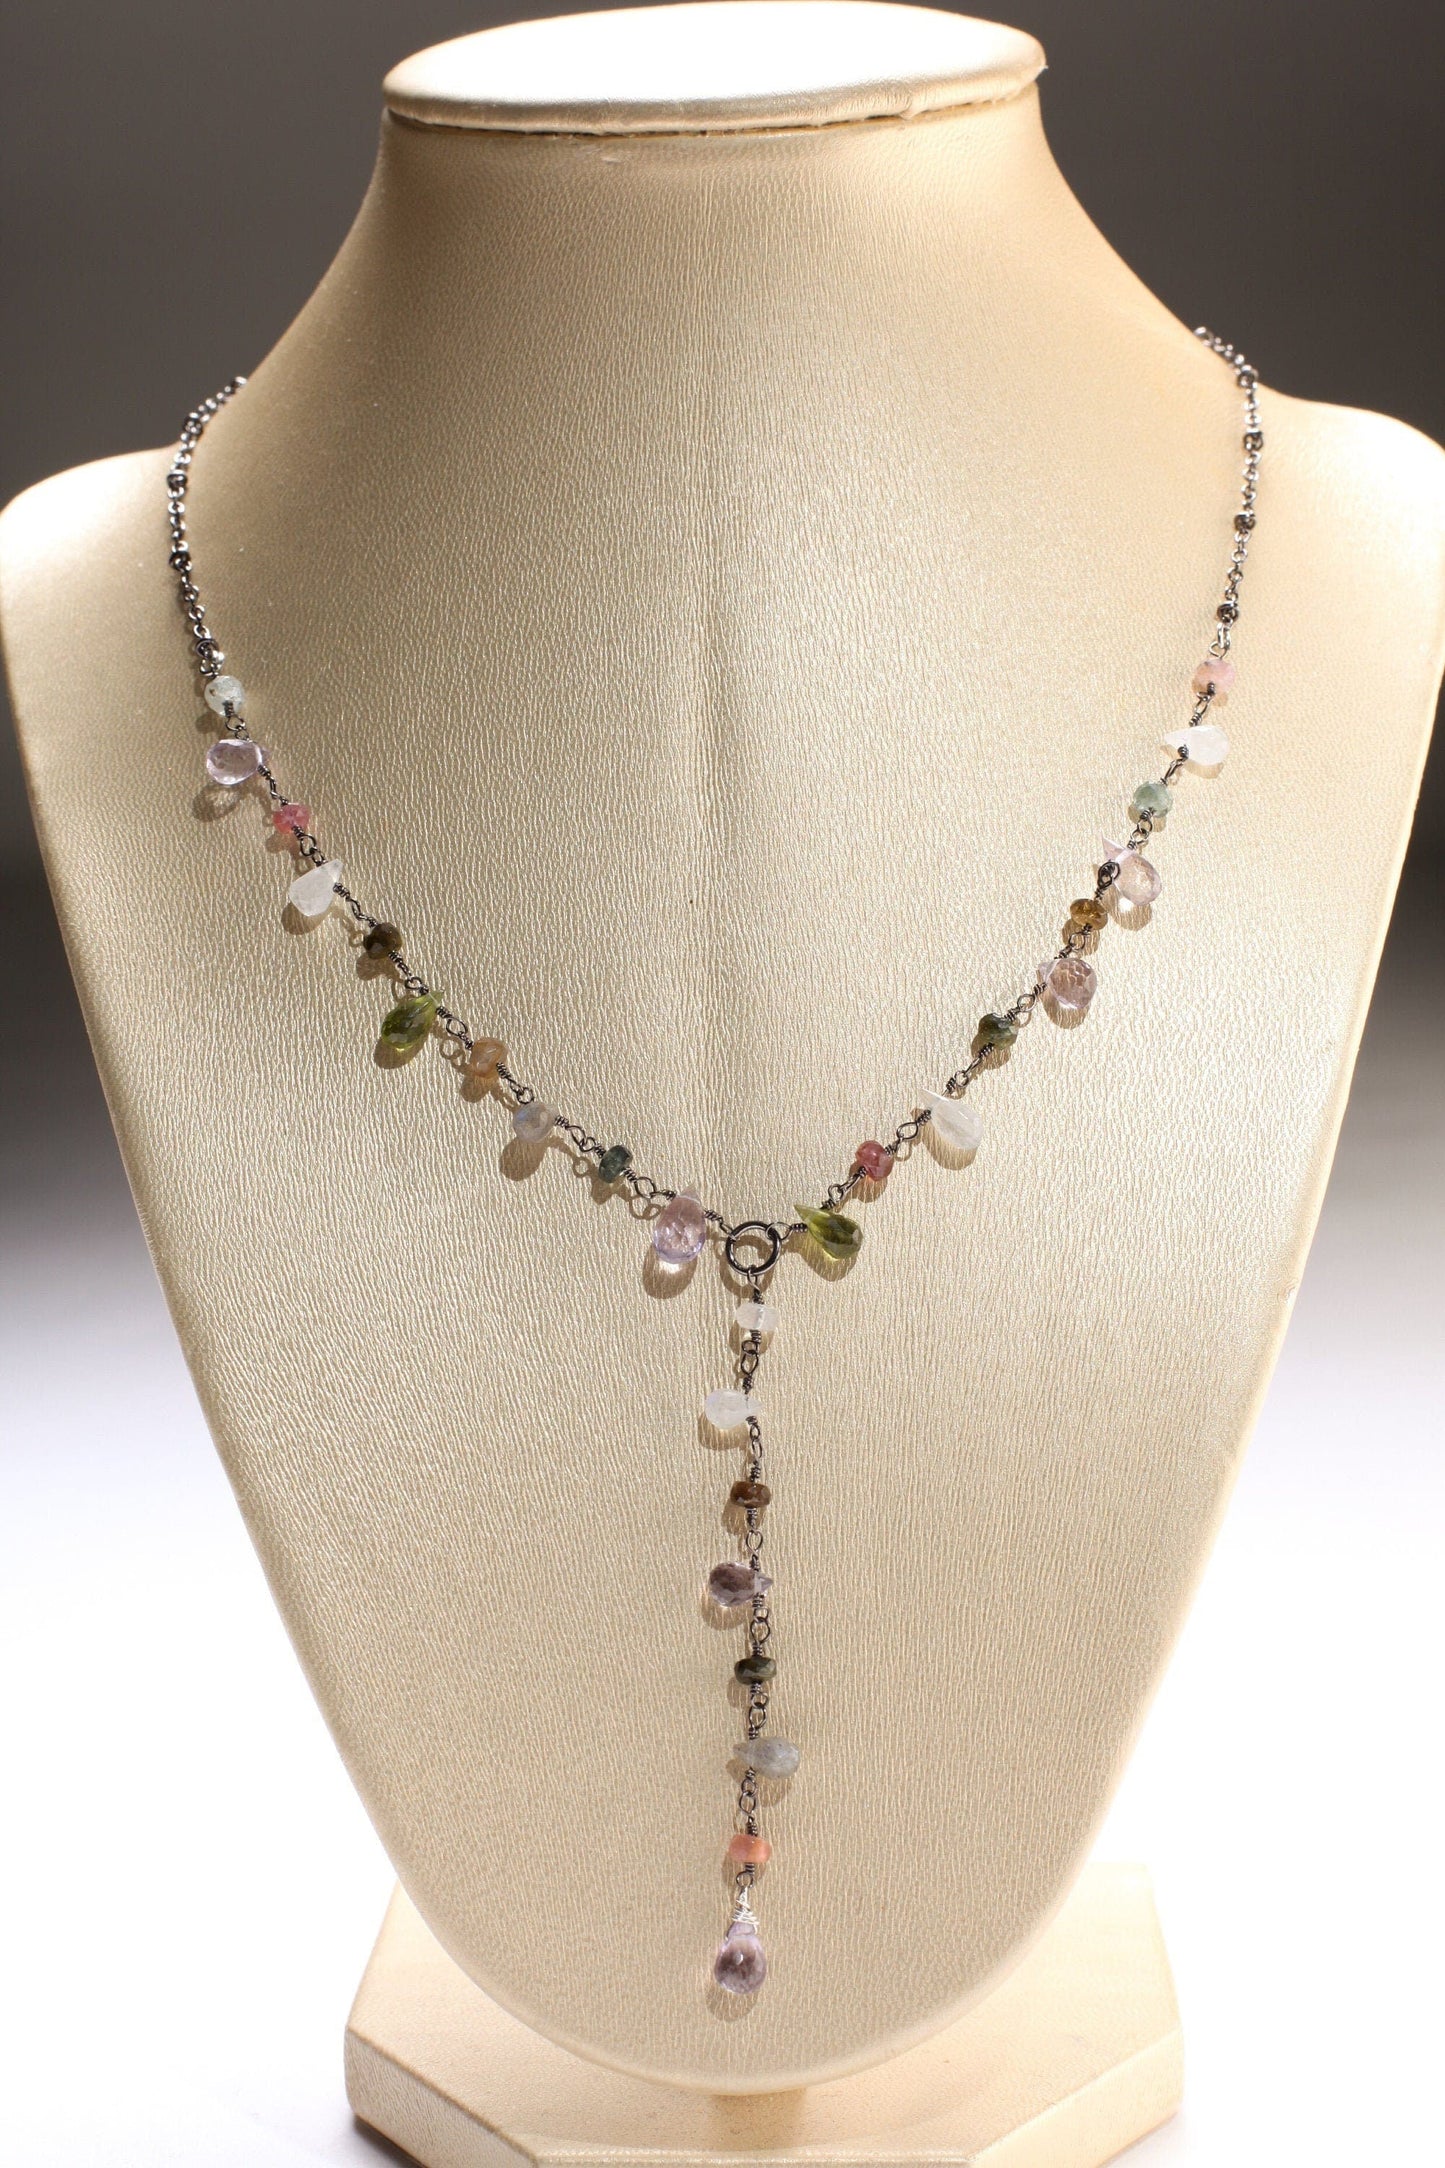 Multi Gemstone Faceted Briolette Rondelle Wire Wrapped Oxidized Silver Y Necklace, Peridot, Labradorite,Moonstone,Tourmaline, Pink Amethyst